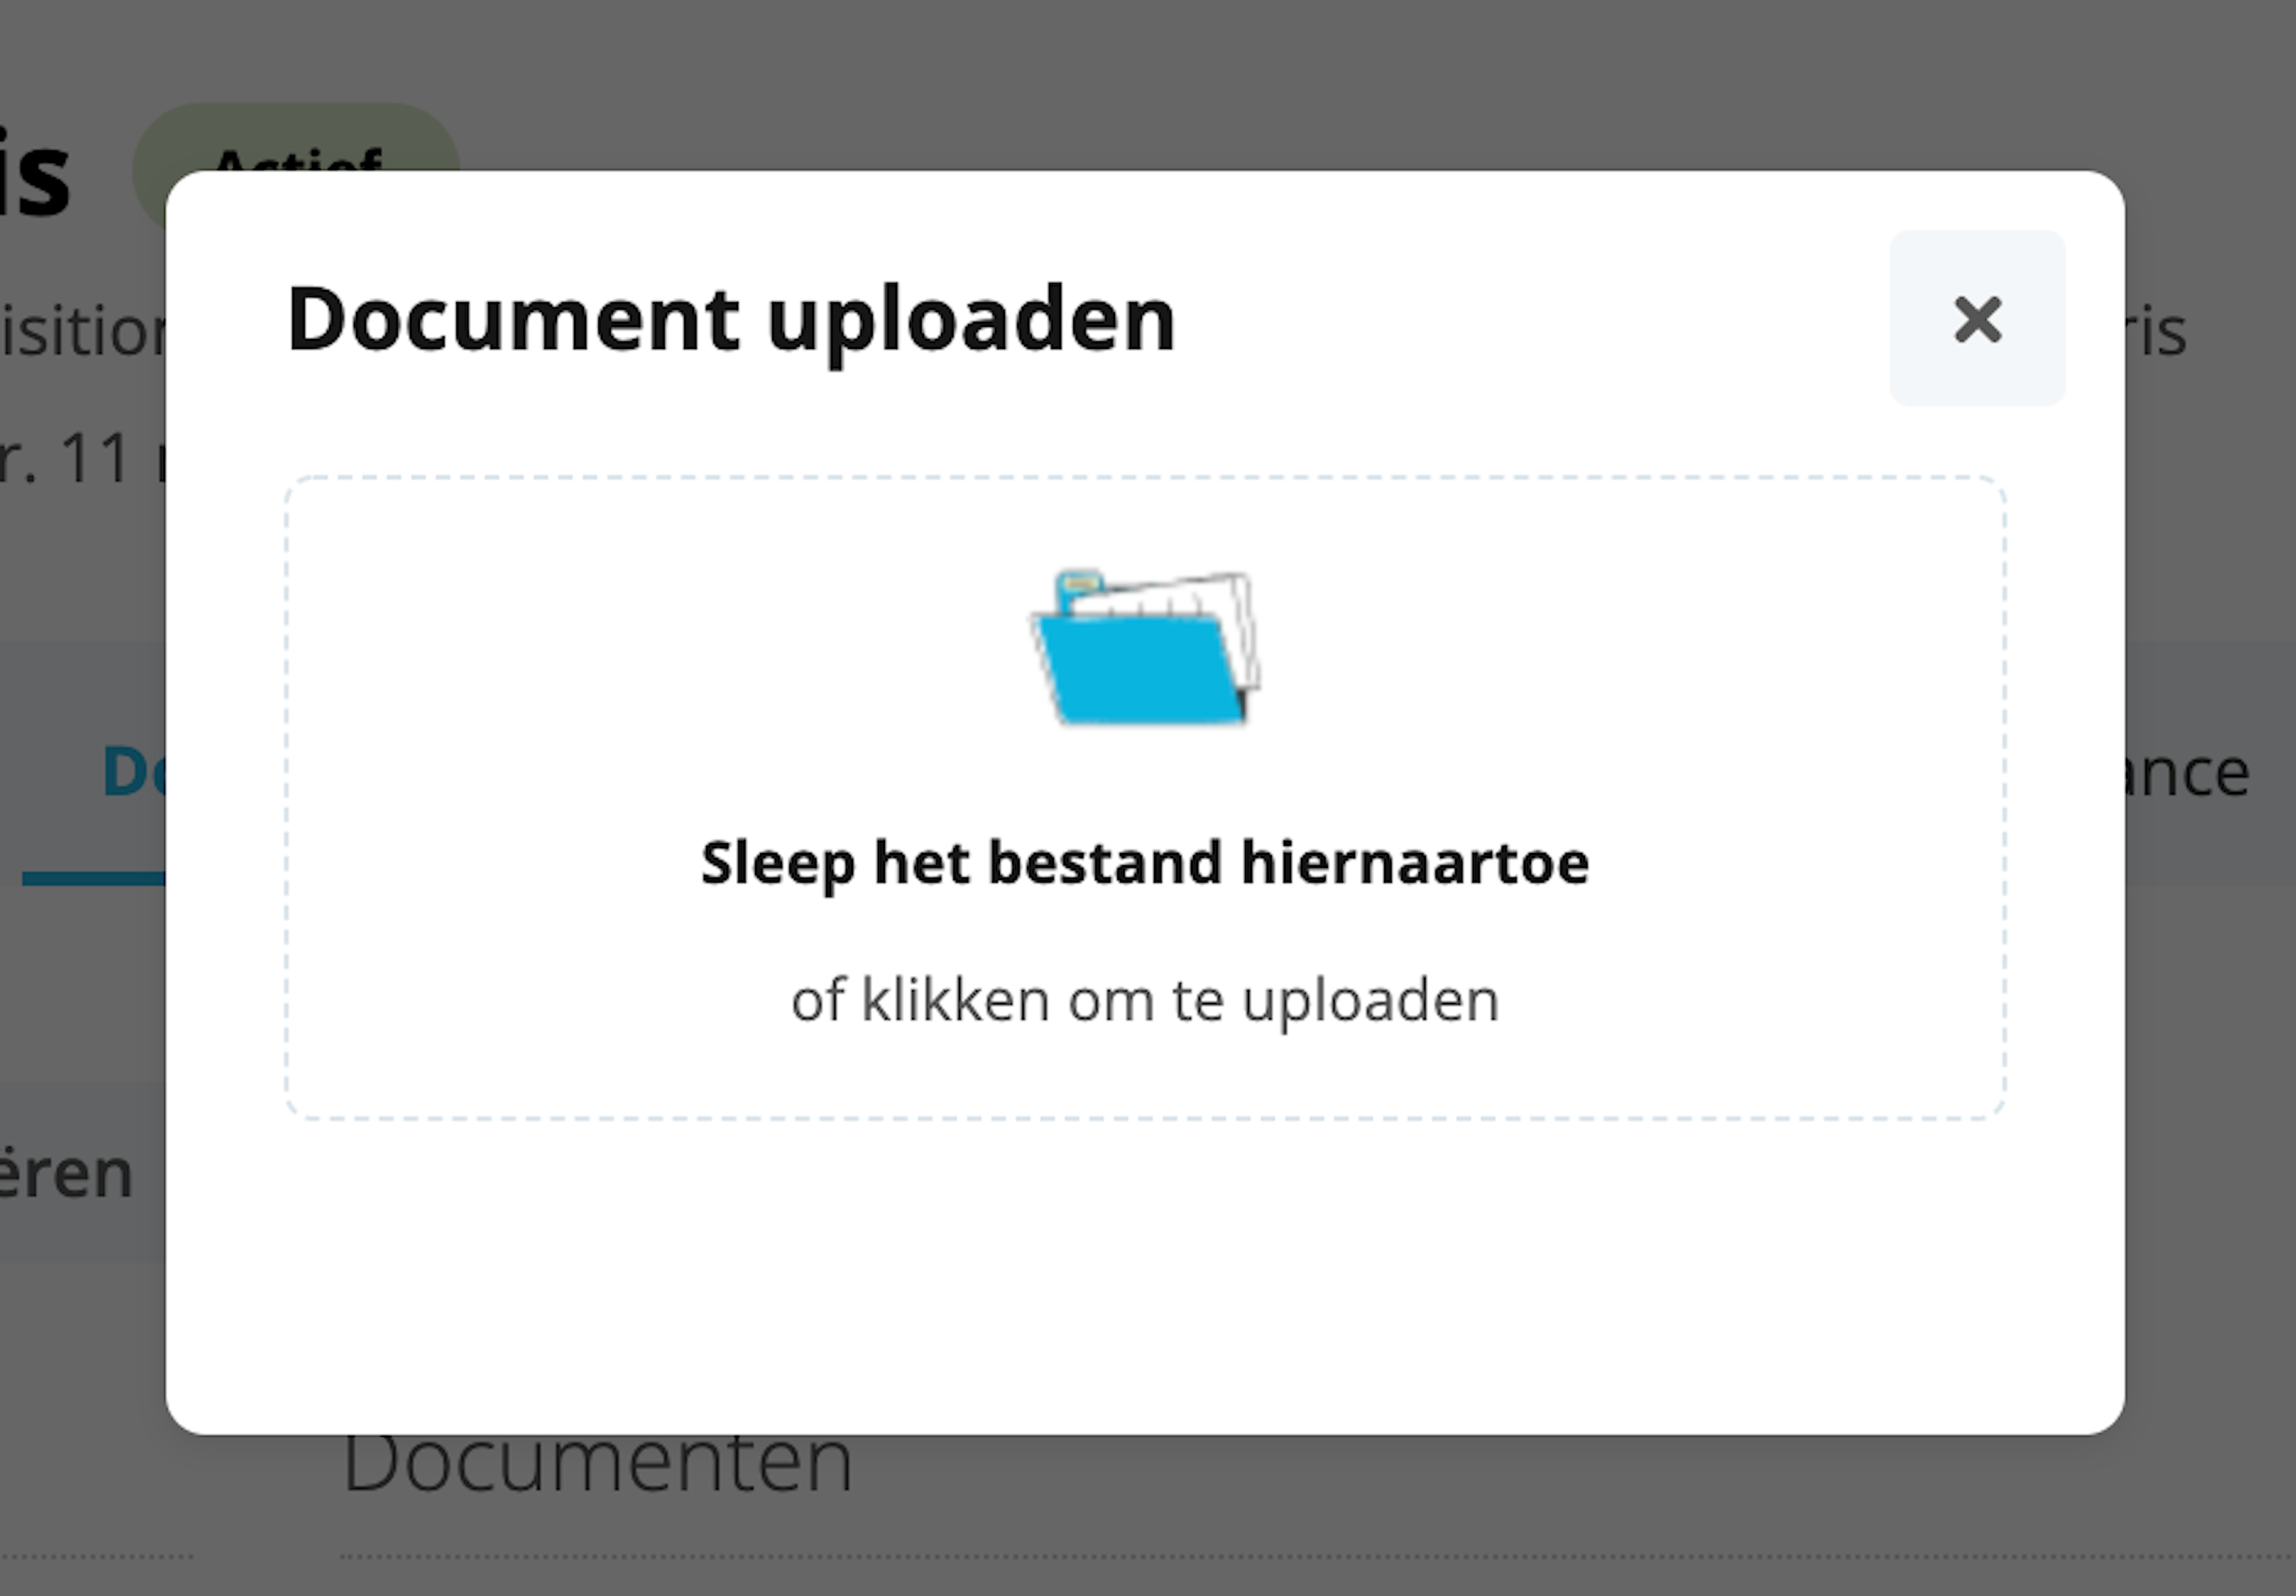 profile-document-upload-work-contract_nl.png